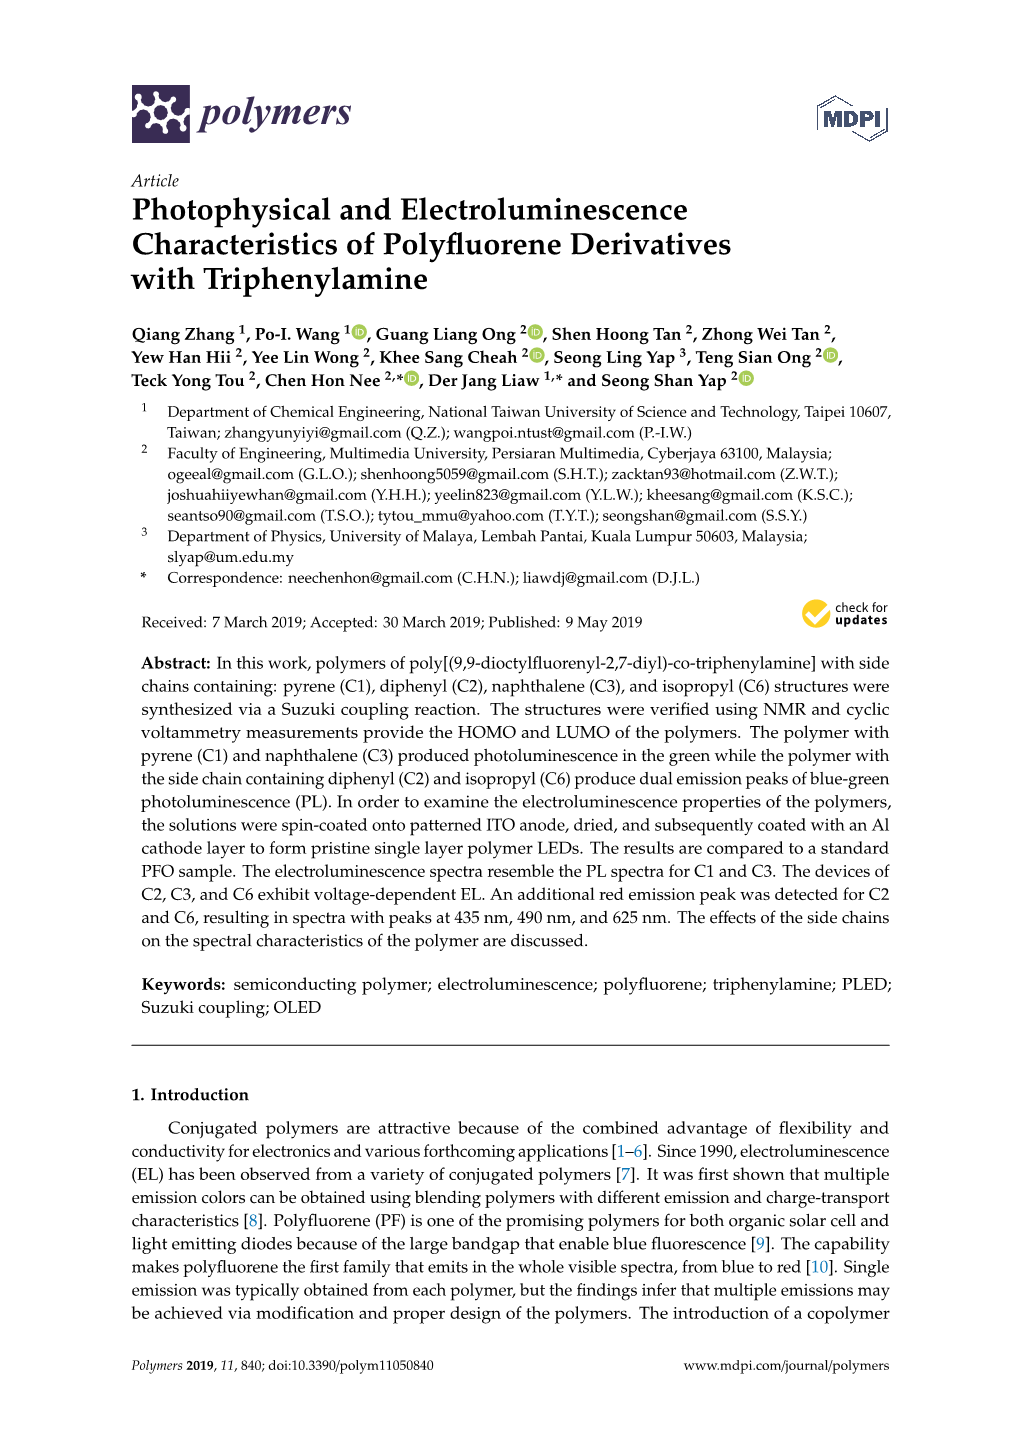 Photophysical and Electroluminescence Characteristics of Polyﬂuorene Derivatives with Triphenylamine